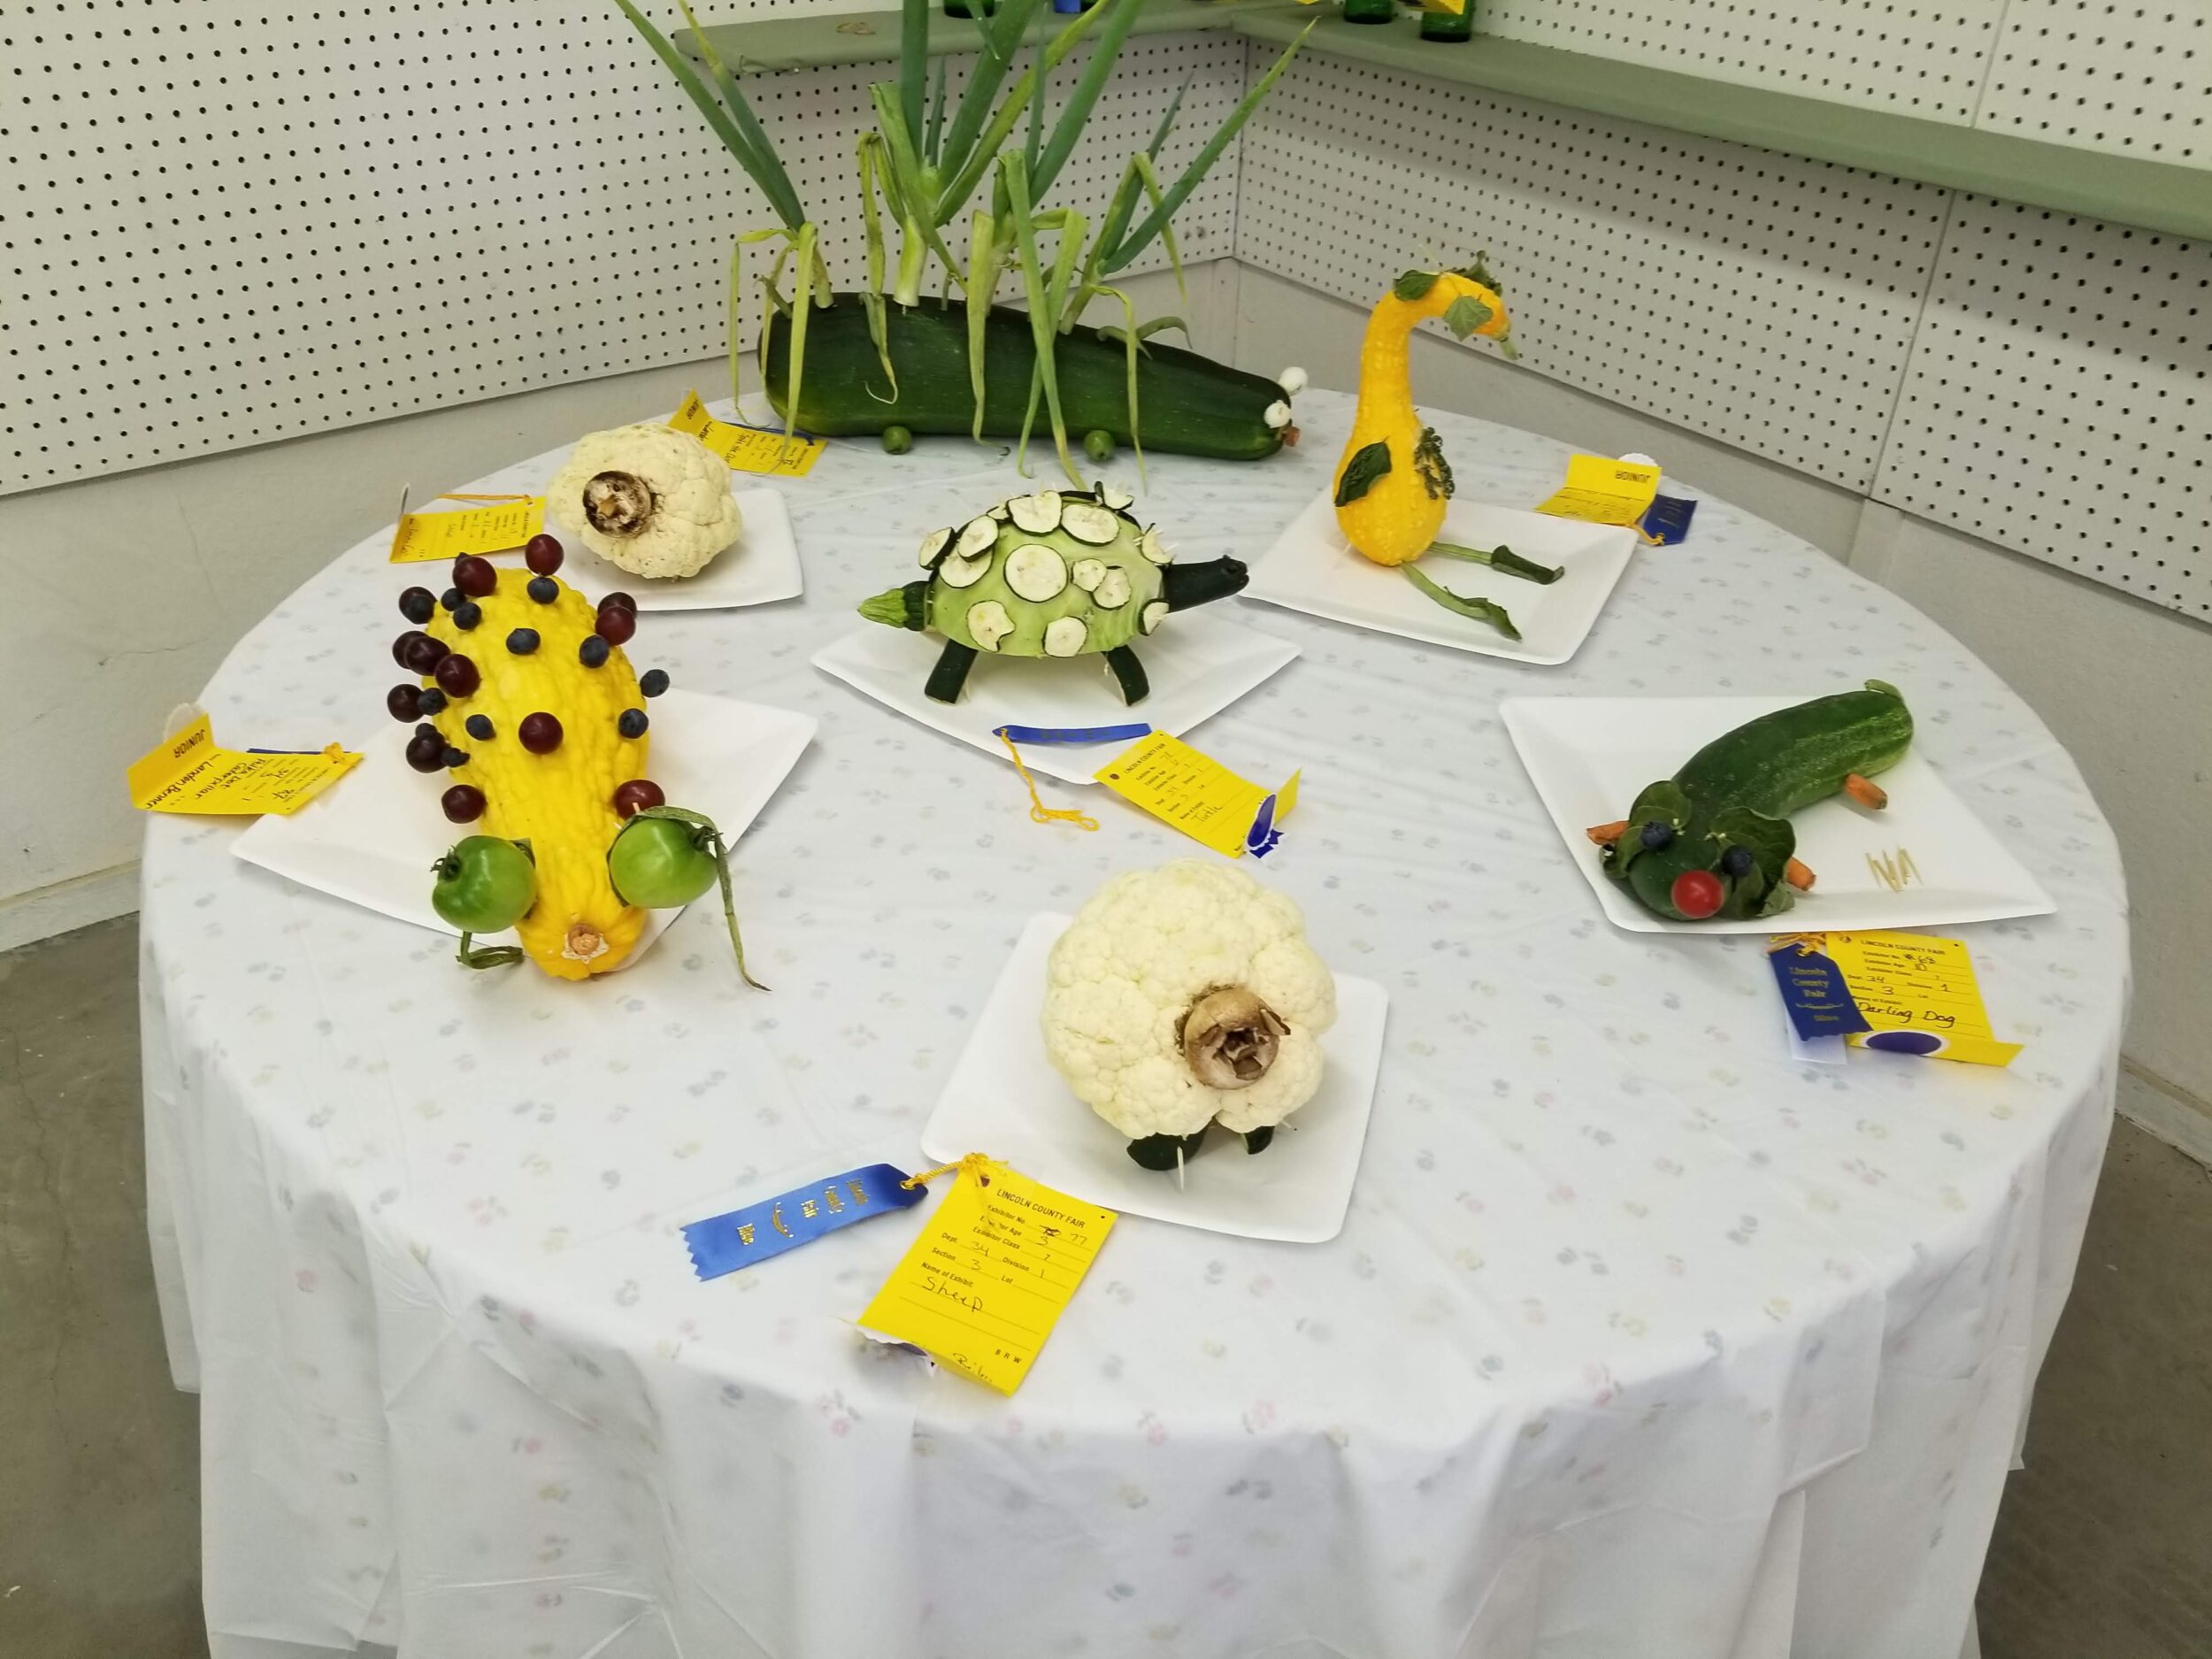 Table with vegetables decorated as animal or creepy critters, Foral Department.